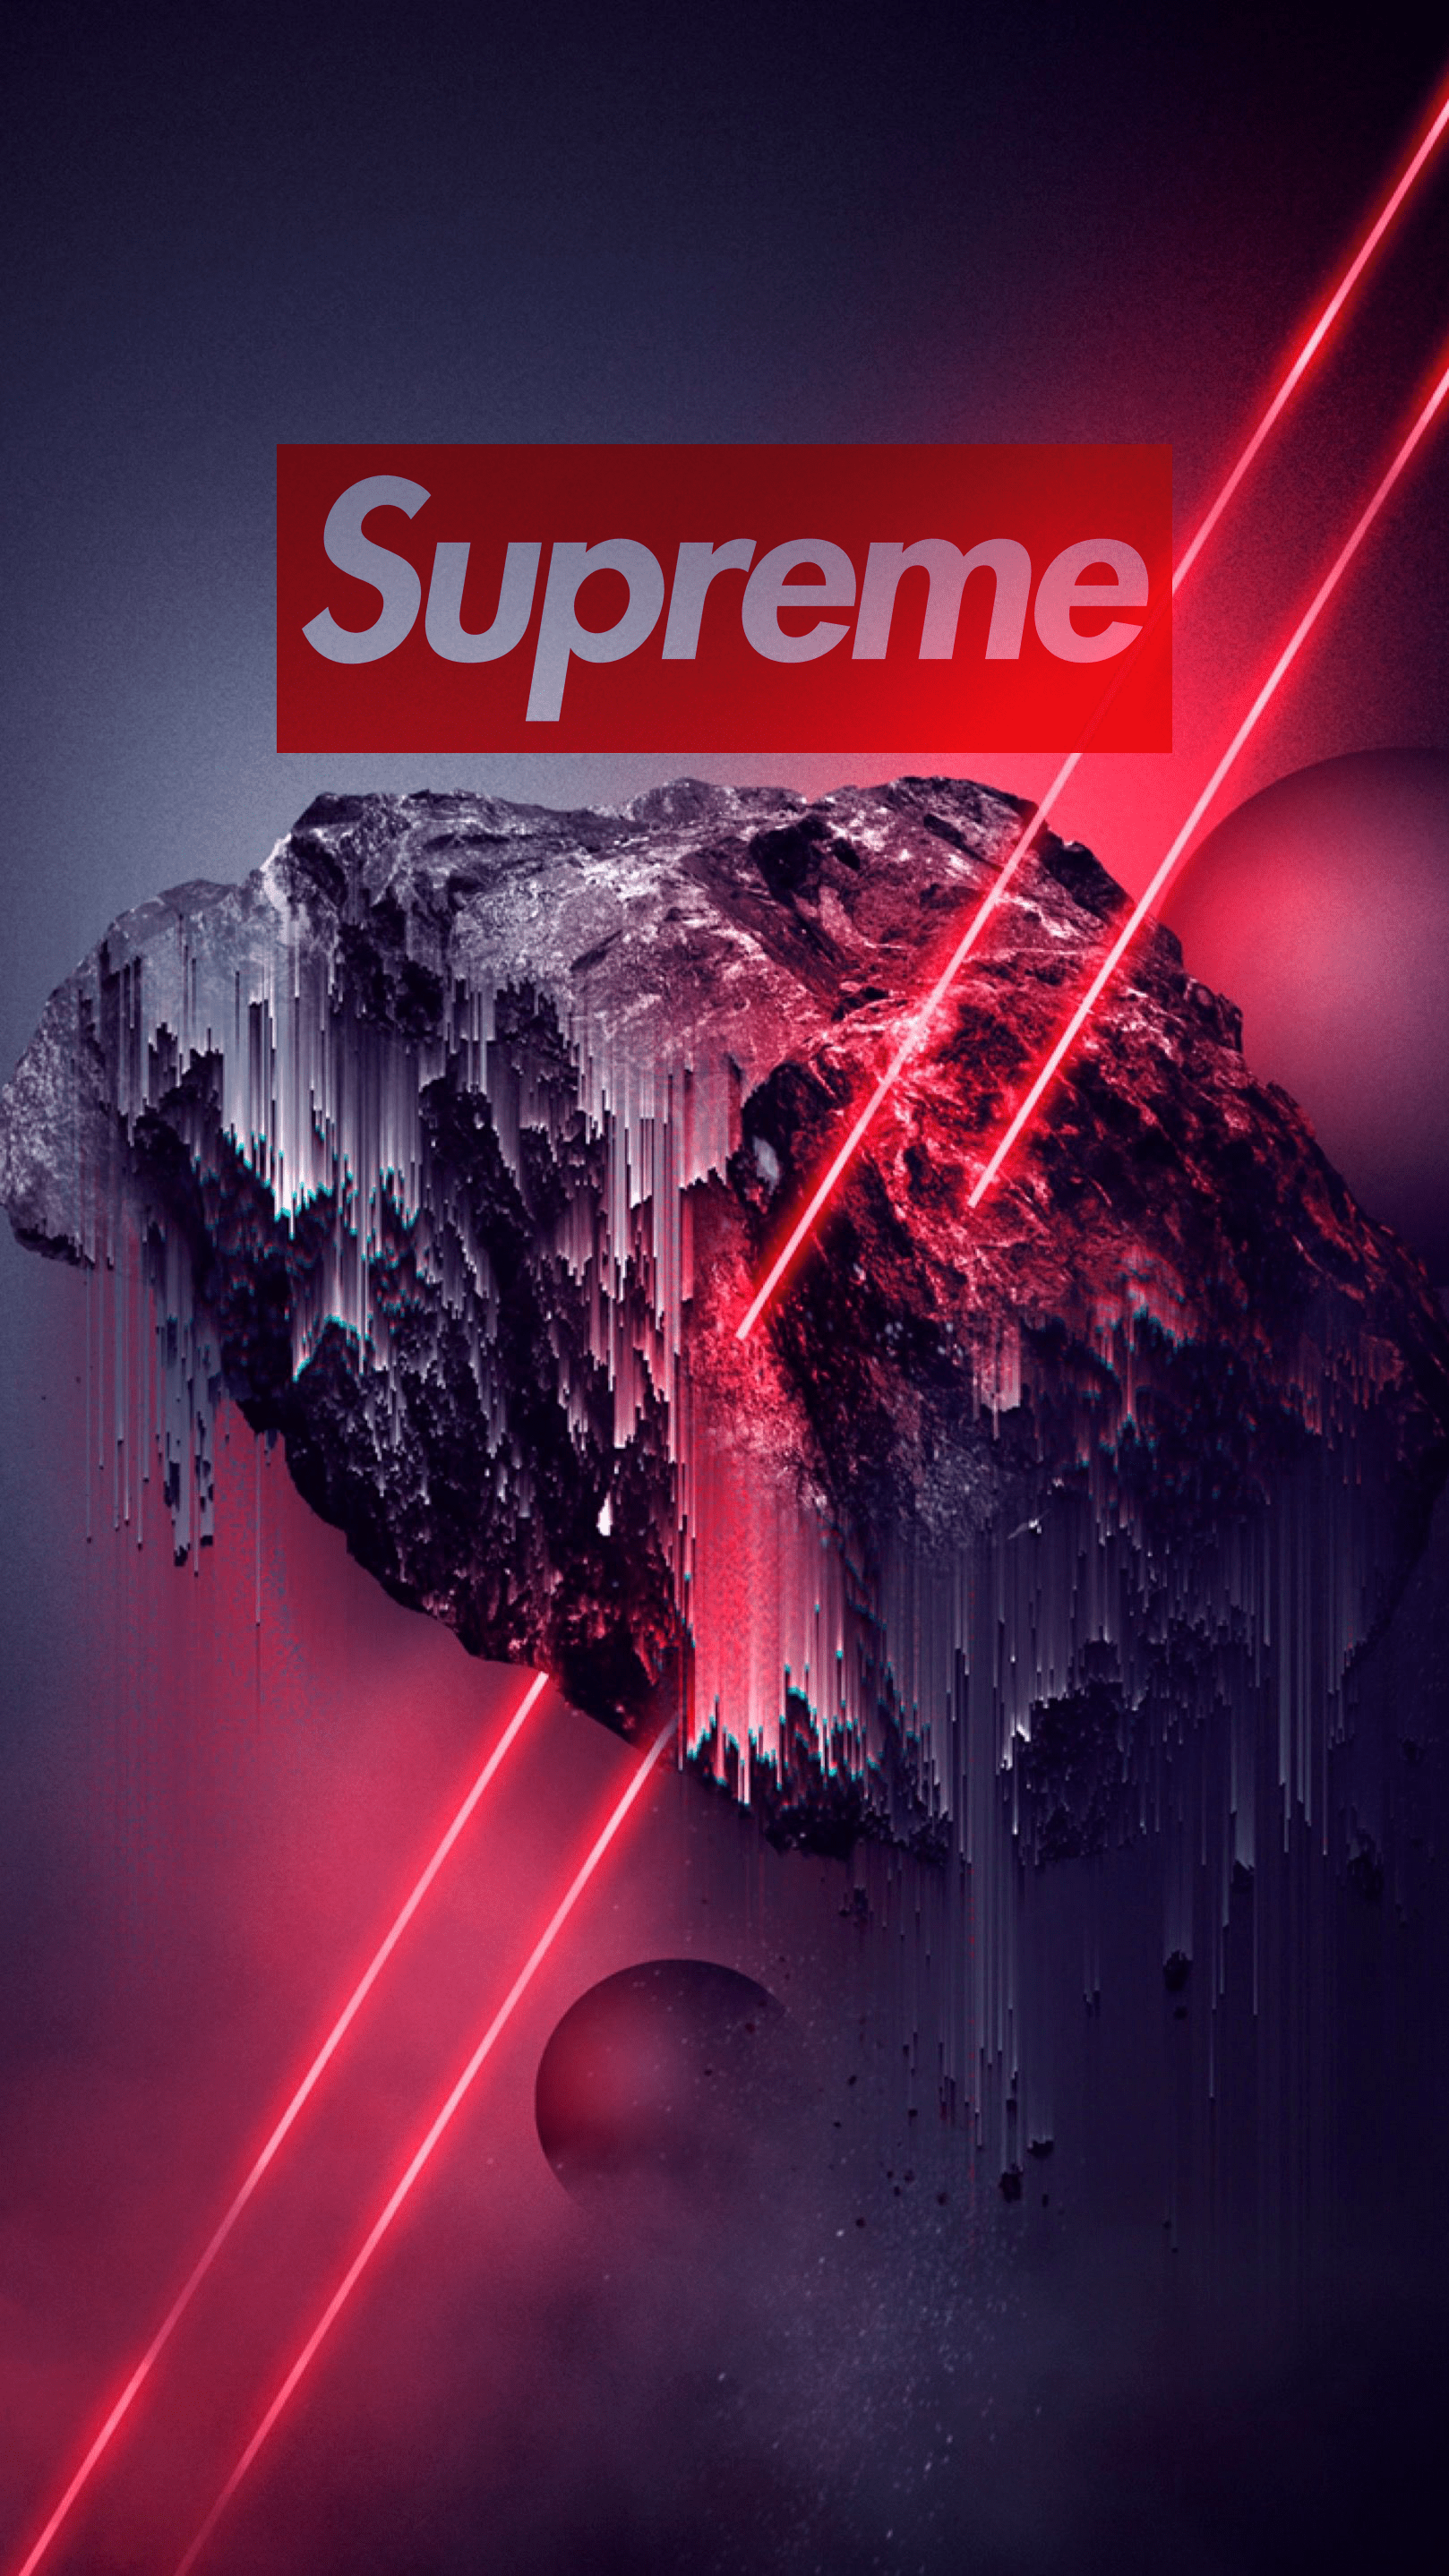 45+] Supreme iPhone Wallpapers Live